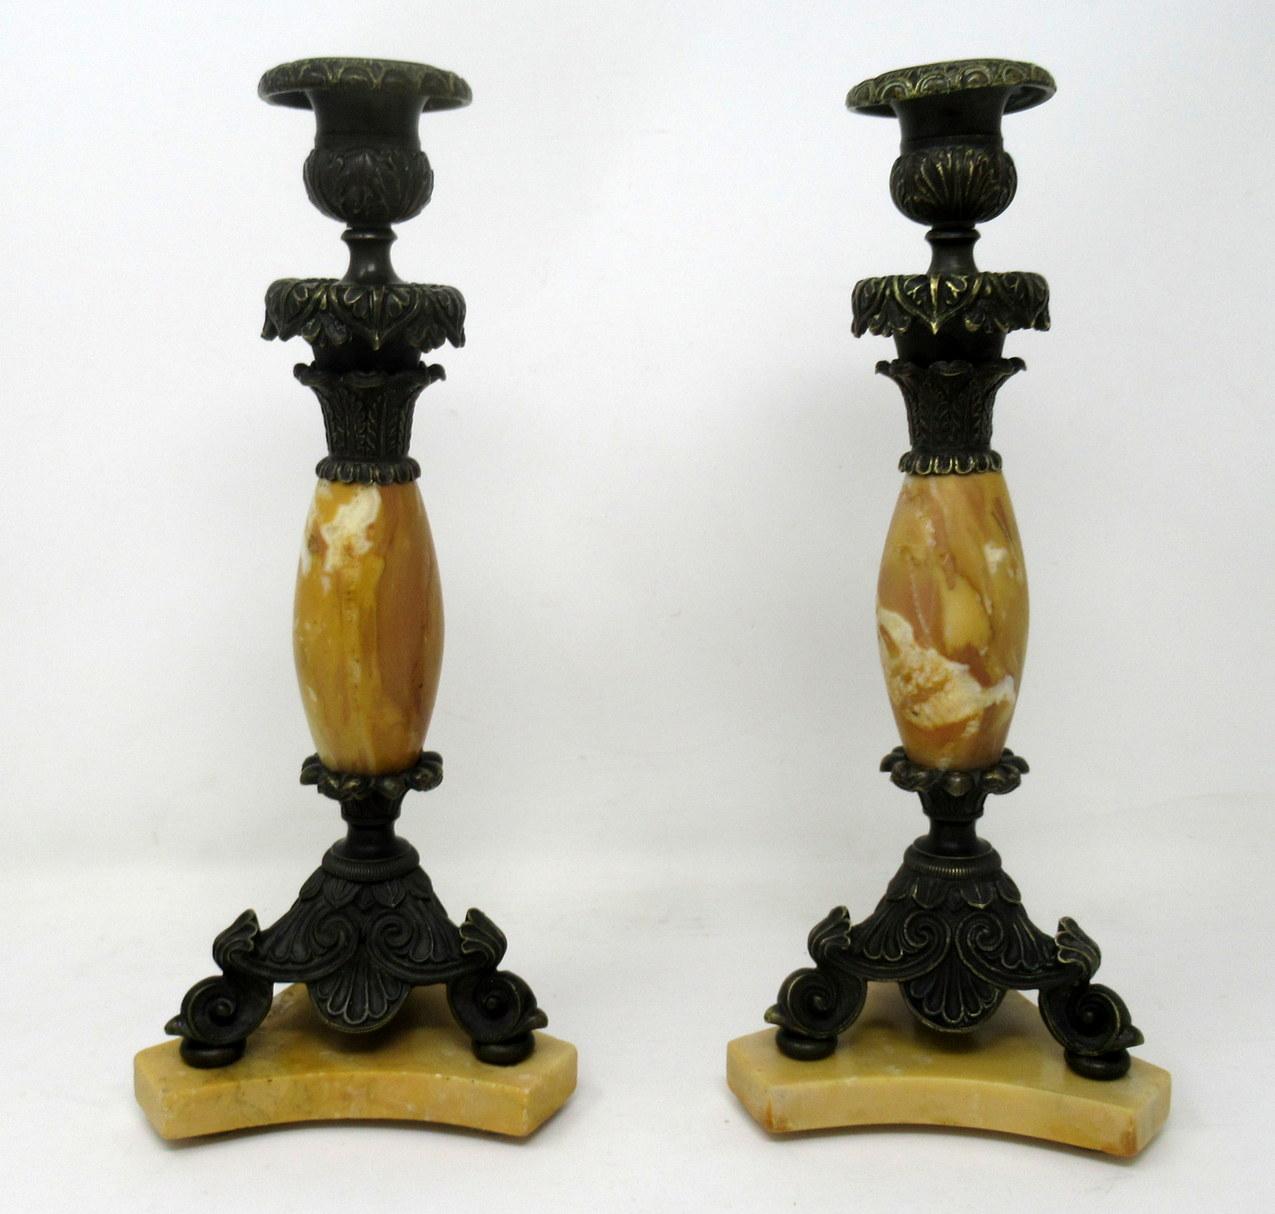 Antique Pair of French Sienna Marble Grand Tour Bronze Candelabra Candlesticks In Good Condition For Sale In Dublin, Ireland